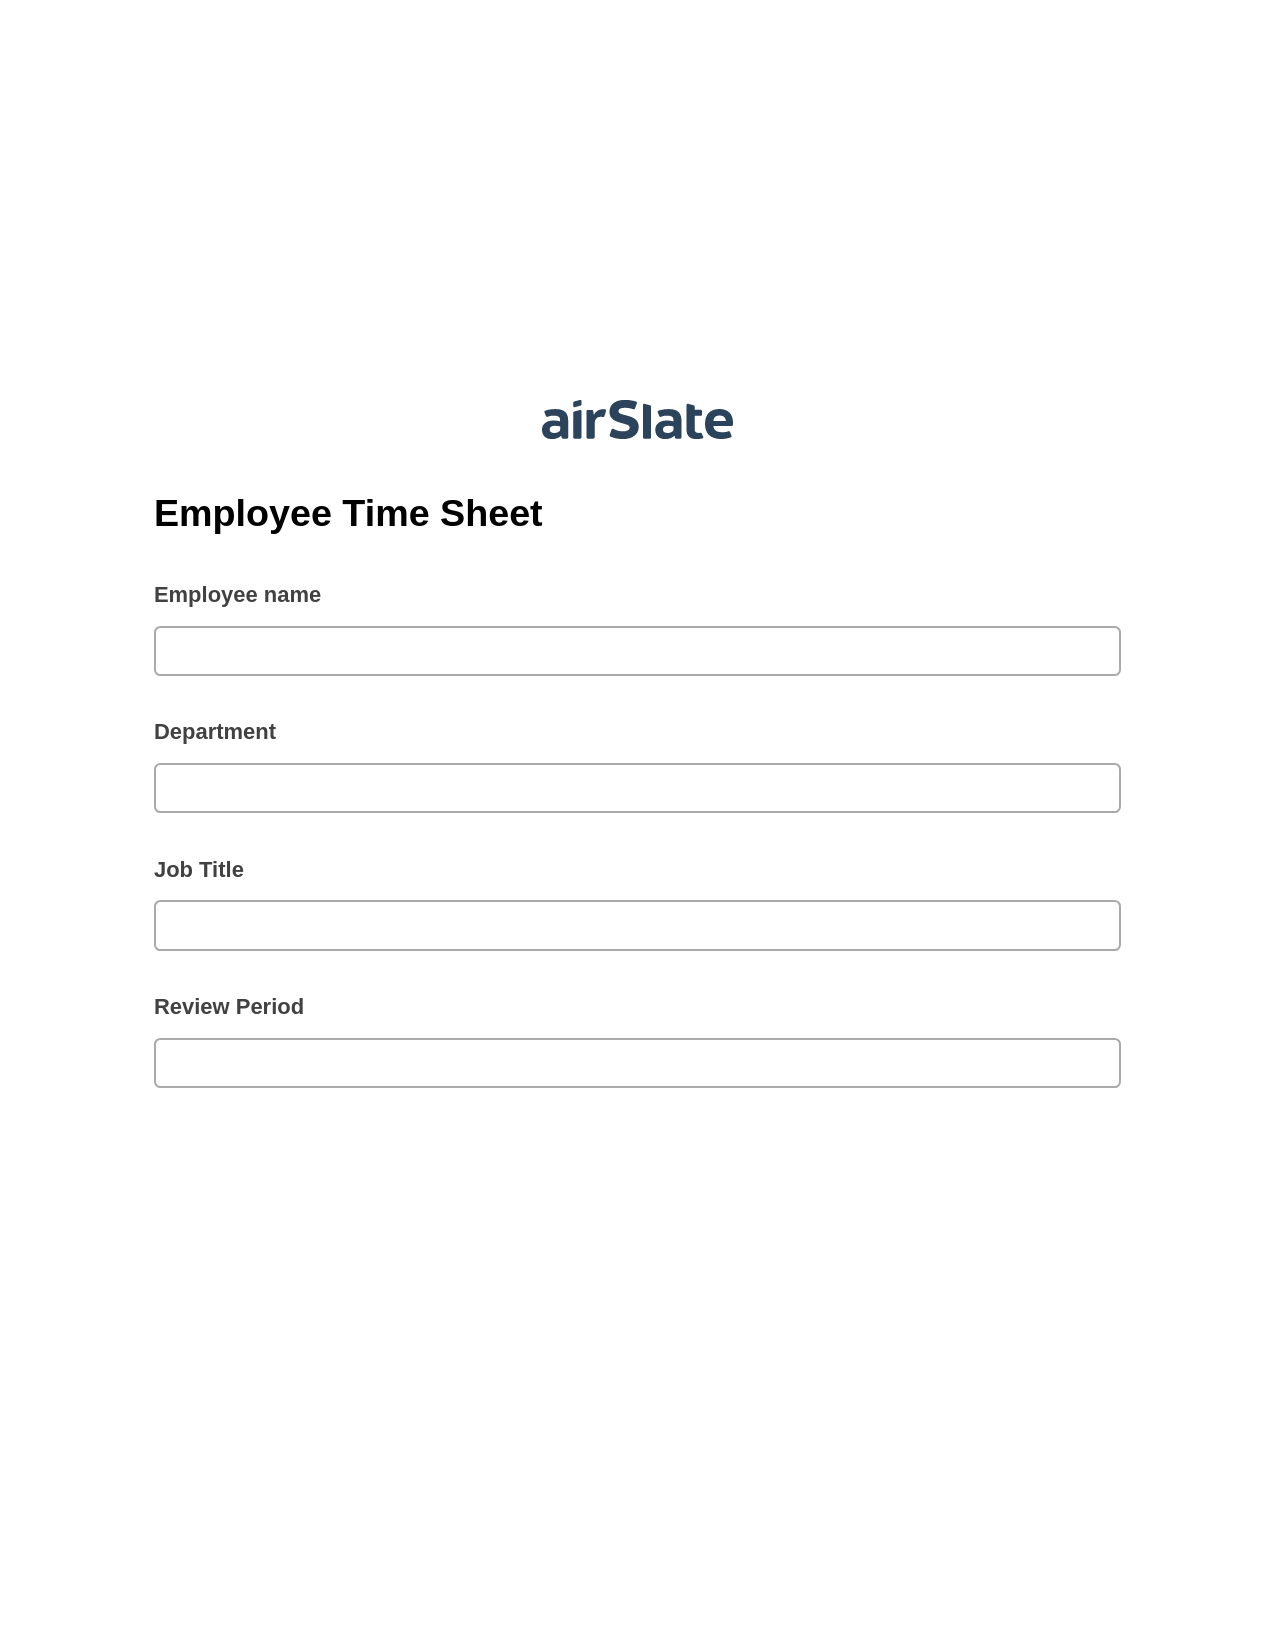 Multirole Employee Time Sheet Pre-fill Dropdowns from Airtable, Update Audit Trail Bot, Slack Notification Postfinish Bot